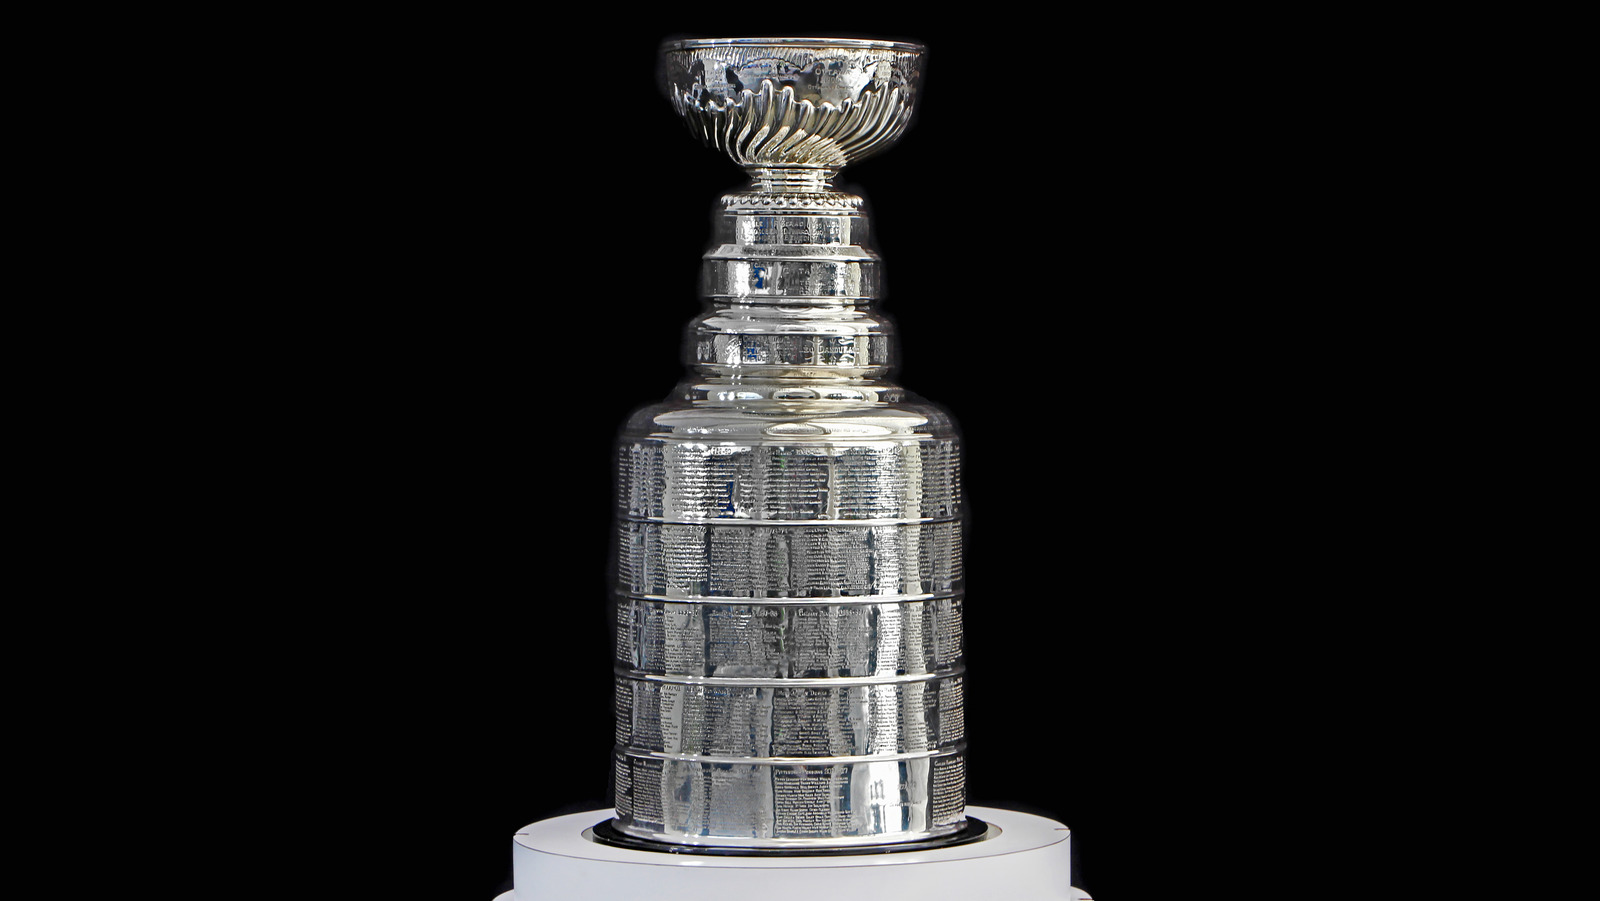 https://www.grunge.com/img/gallery/the-real-reason-the-nhl-removes-champions-from-the-stanley-cup/l-intro-1653662707.jpg